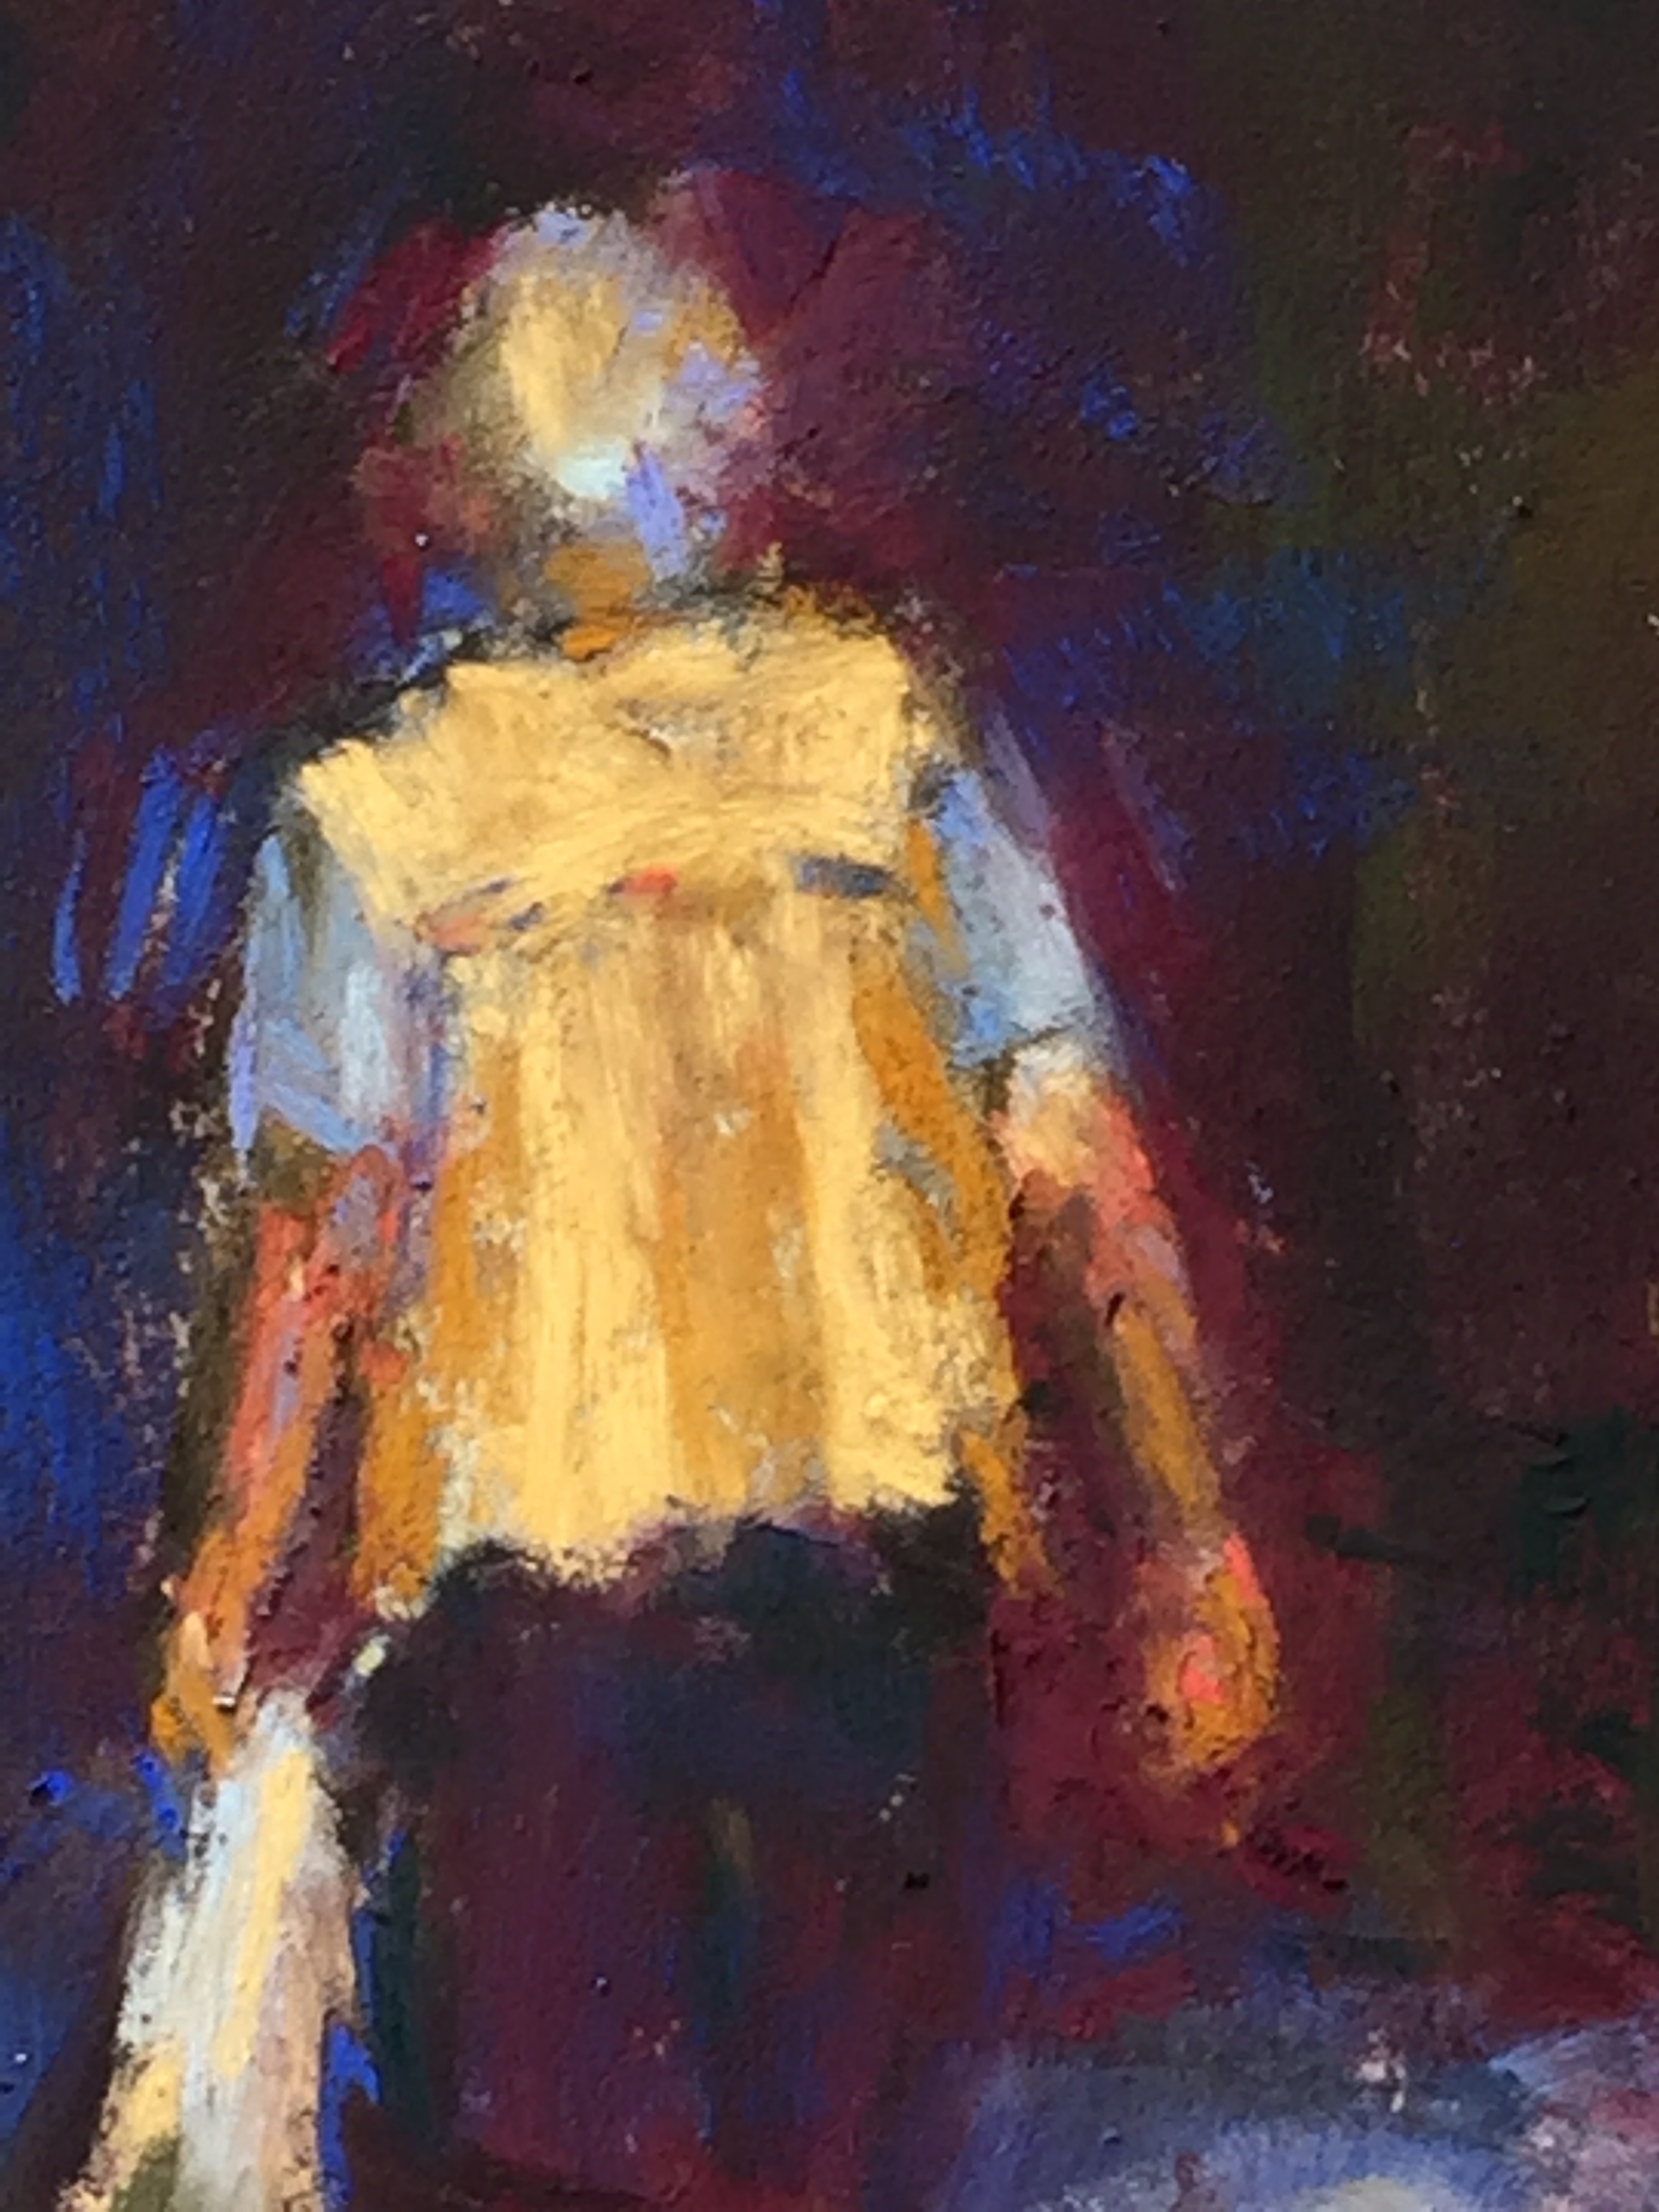 DK Project: Gail Sibley, "Passing Through (Budapest)" - detail, Unison pastels on UArt 500 grit paper, 12 x 13 in